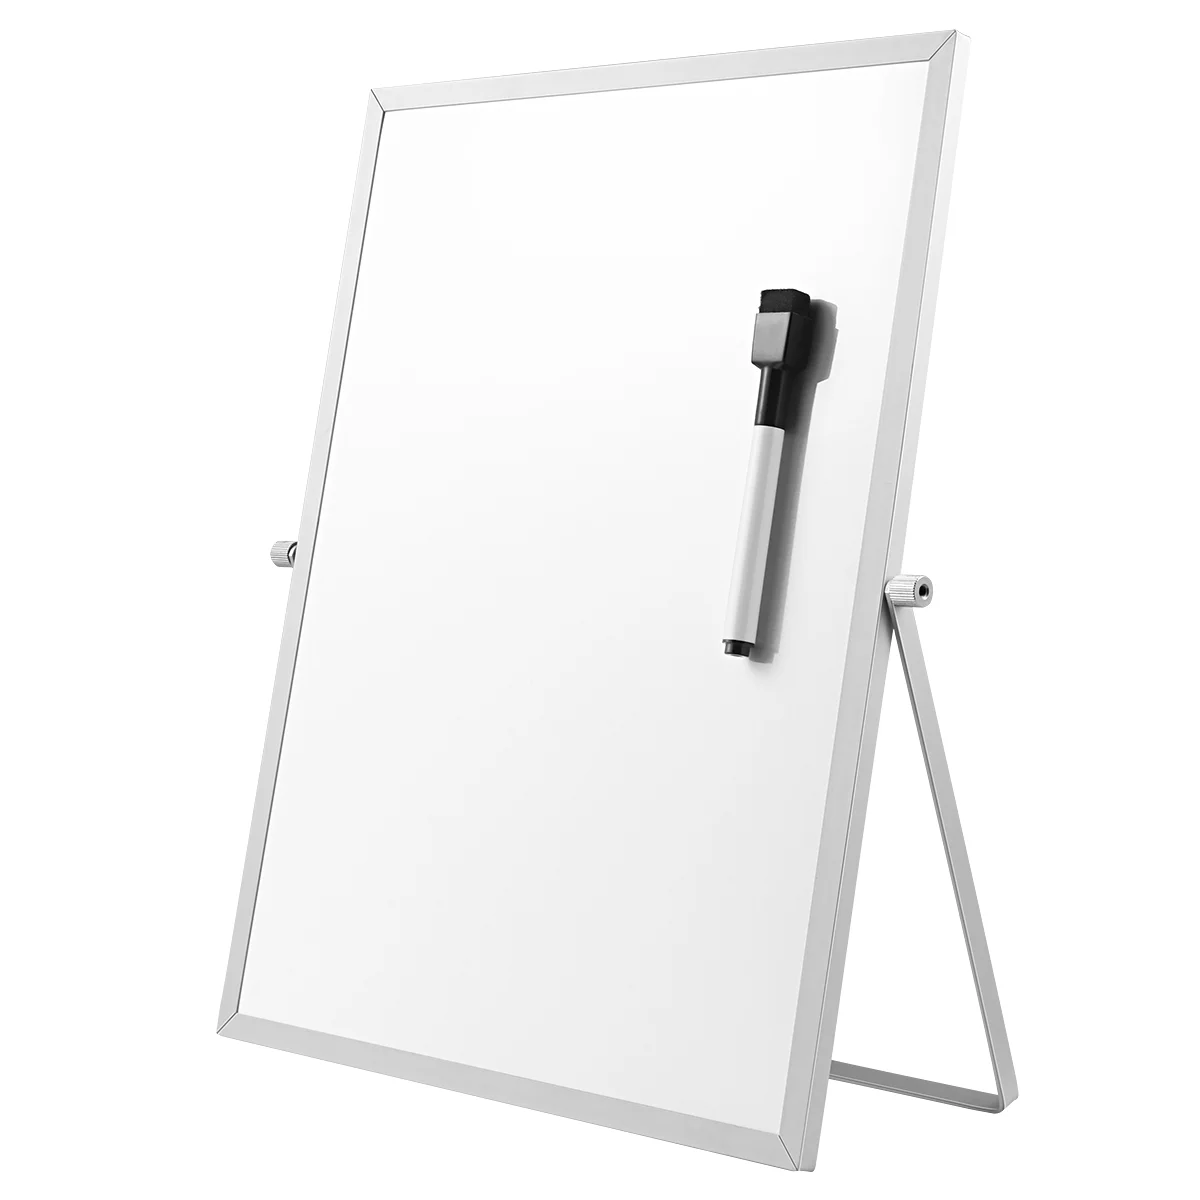 double sided white board dry erase white board erasable writing whiteboard for home office big blackboard Magnetic White Board Dry Erase Board Double Sided Practical with Stand White Board for Office School Home Whiteboard Erasable